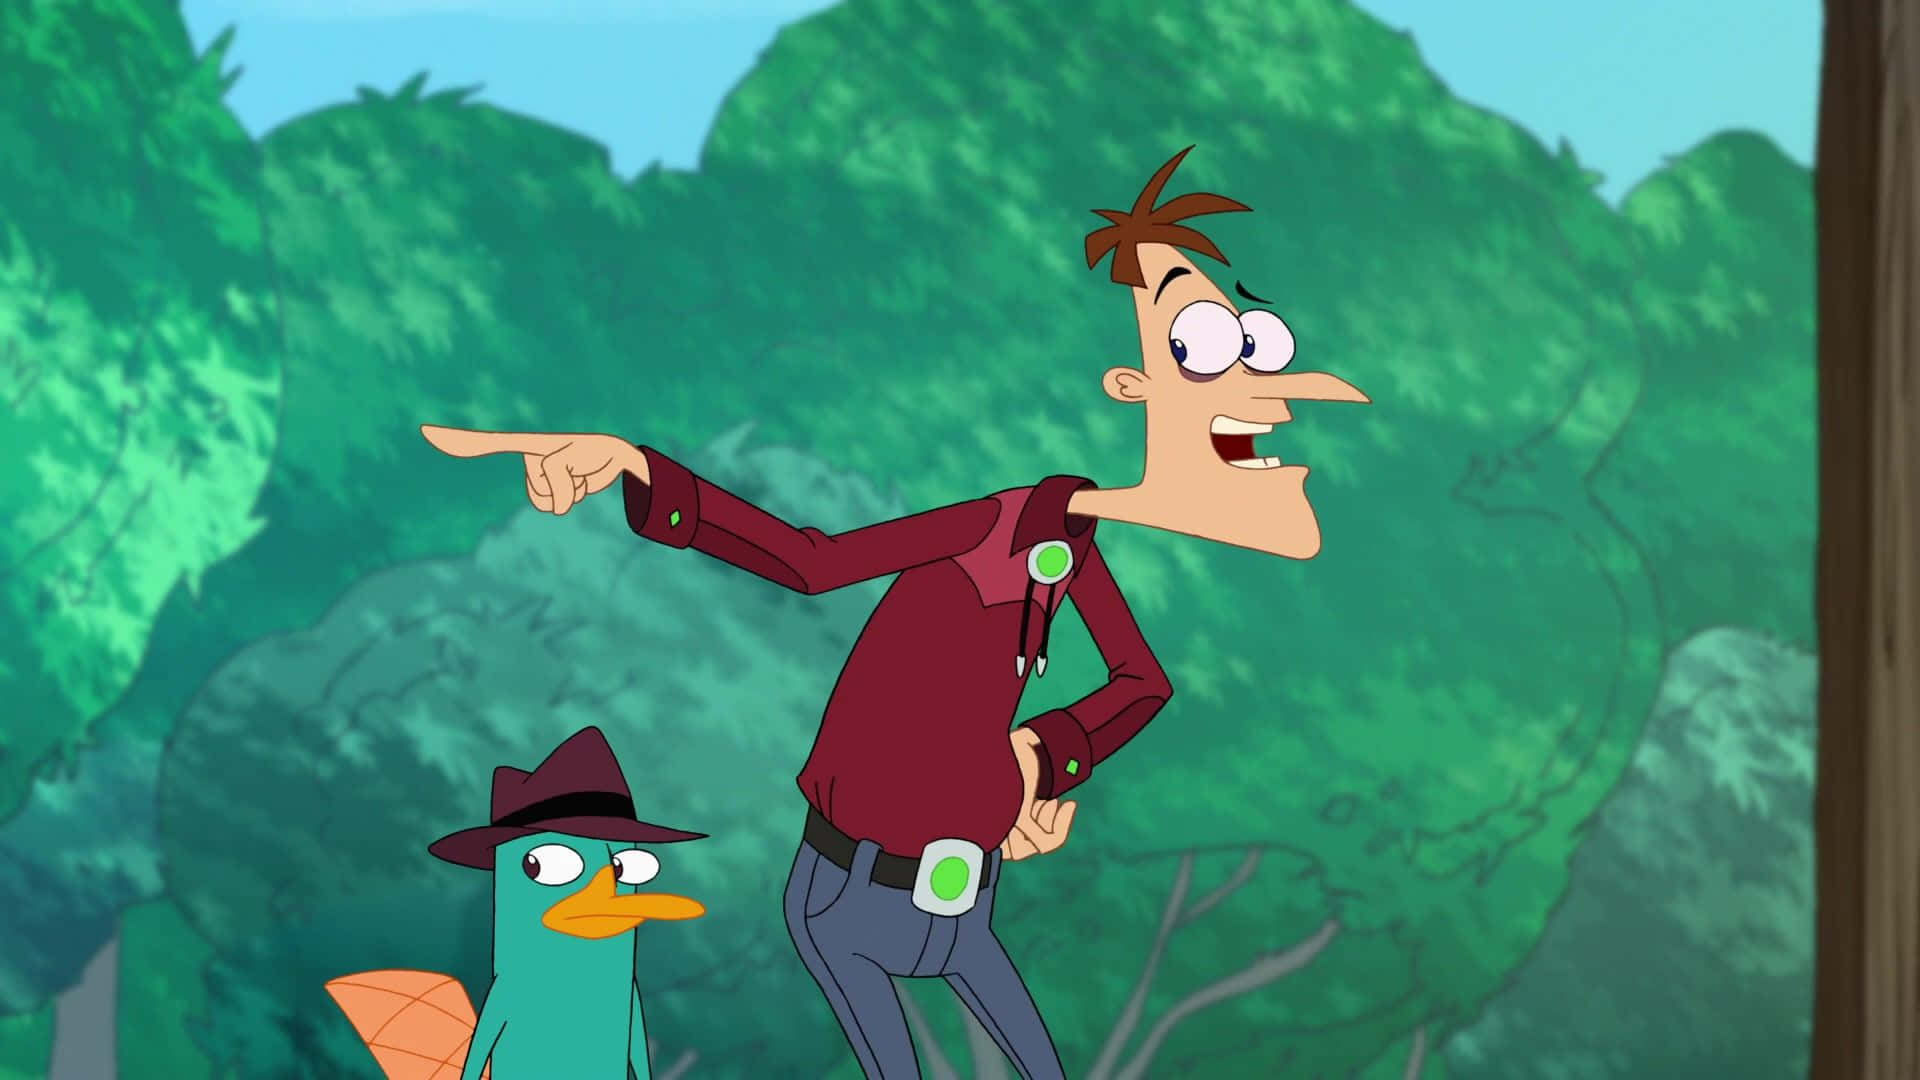 Phineas and Ferb embark on their exciting new adventure!